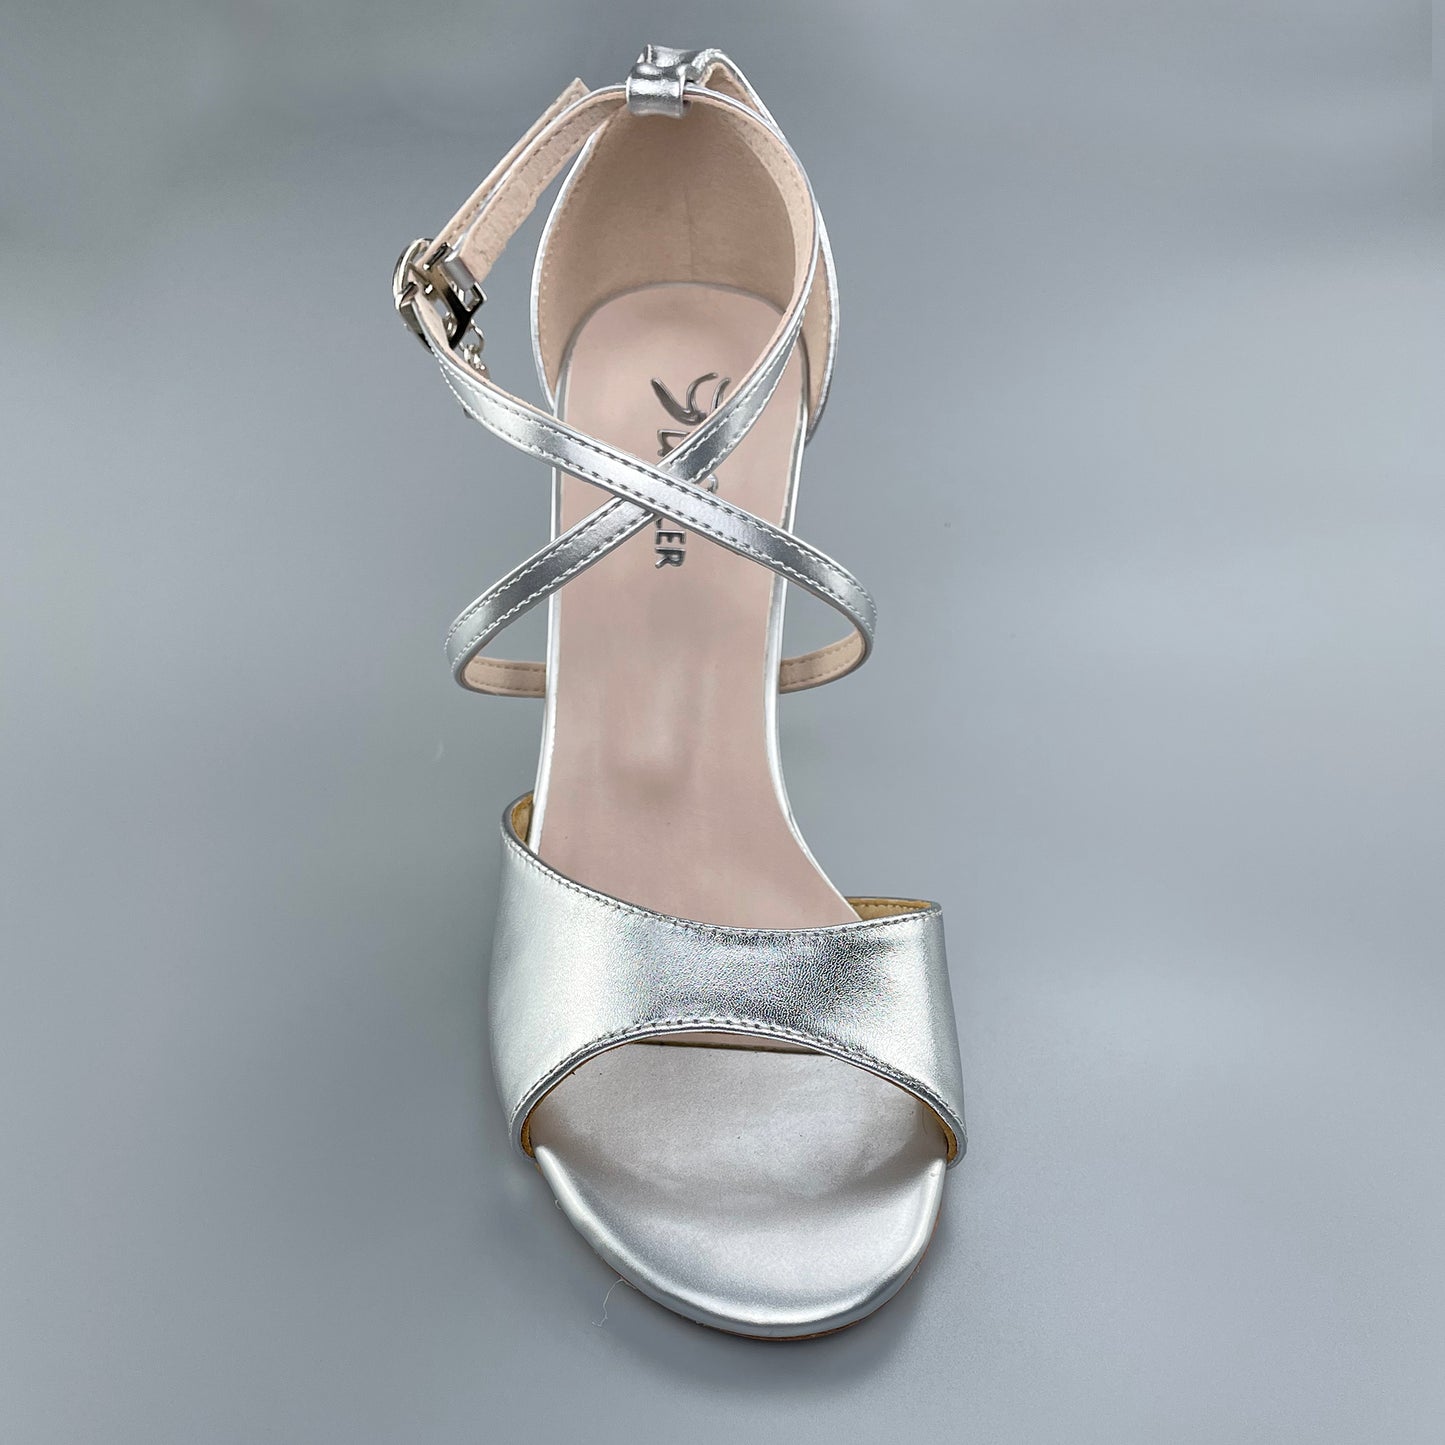 Pro Dancer Open-toe and Closed-back Argentine Tango Shoes High Salsa Heels Hard Leather Sole Sandals Silver (PD-9045B)